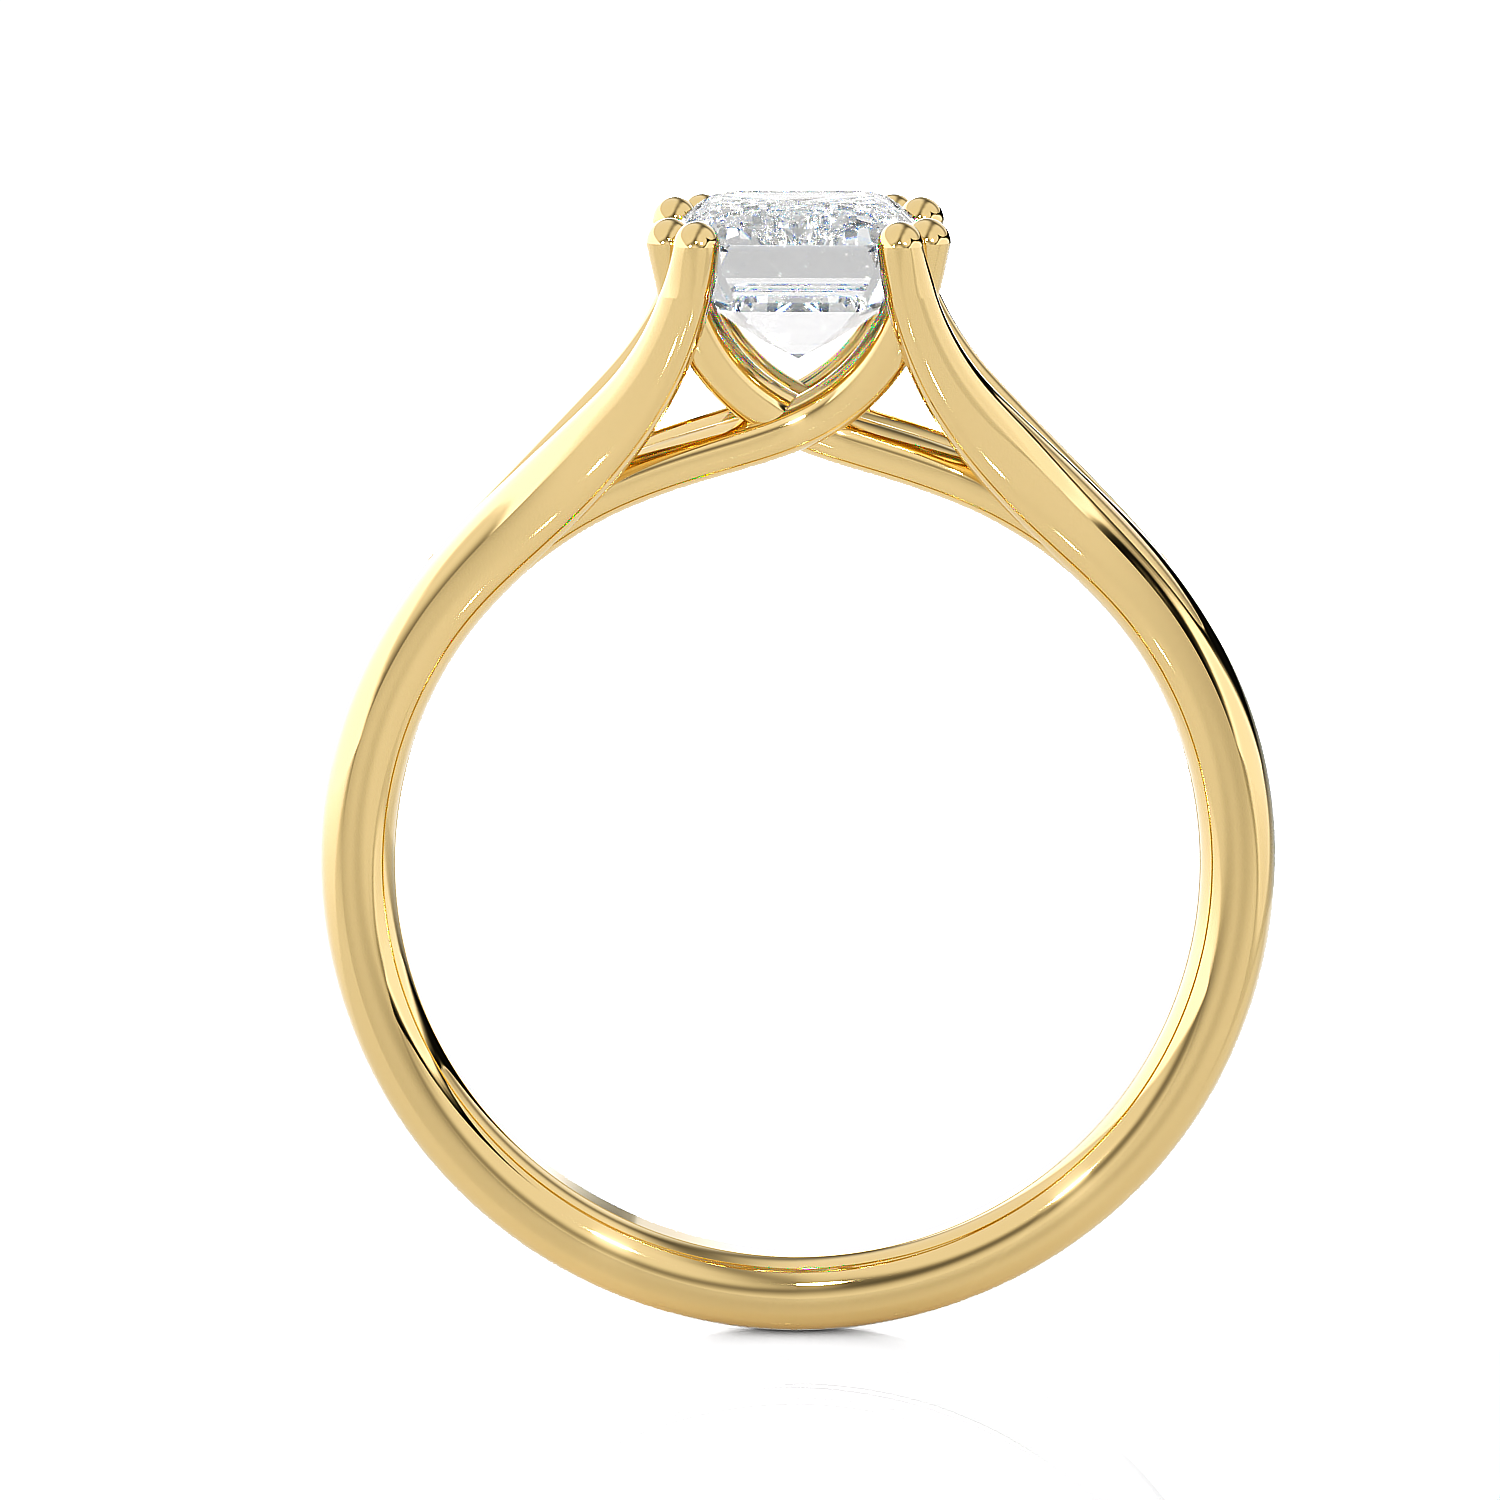 Radiant-Cut Lab Grown Diamond Solitaire Engagement Ring